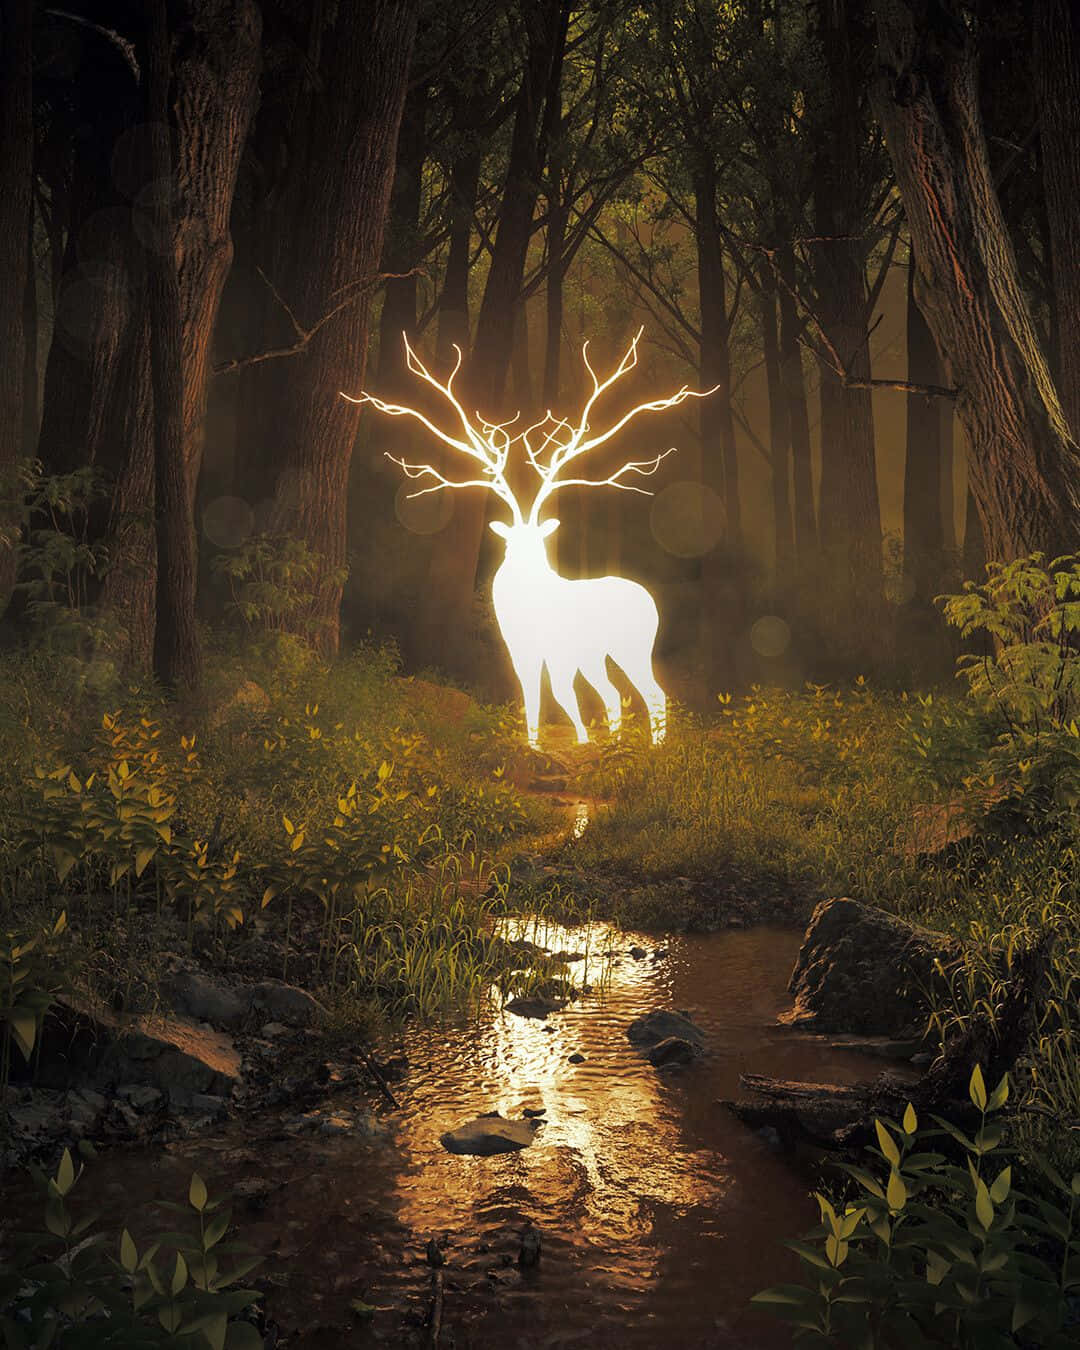 Take A Break From Everyday Life And Watch A Cool Deer Hangin' Around In Nature Background